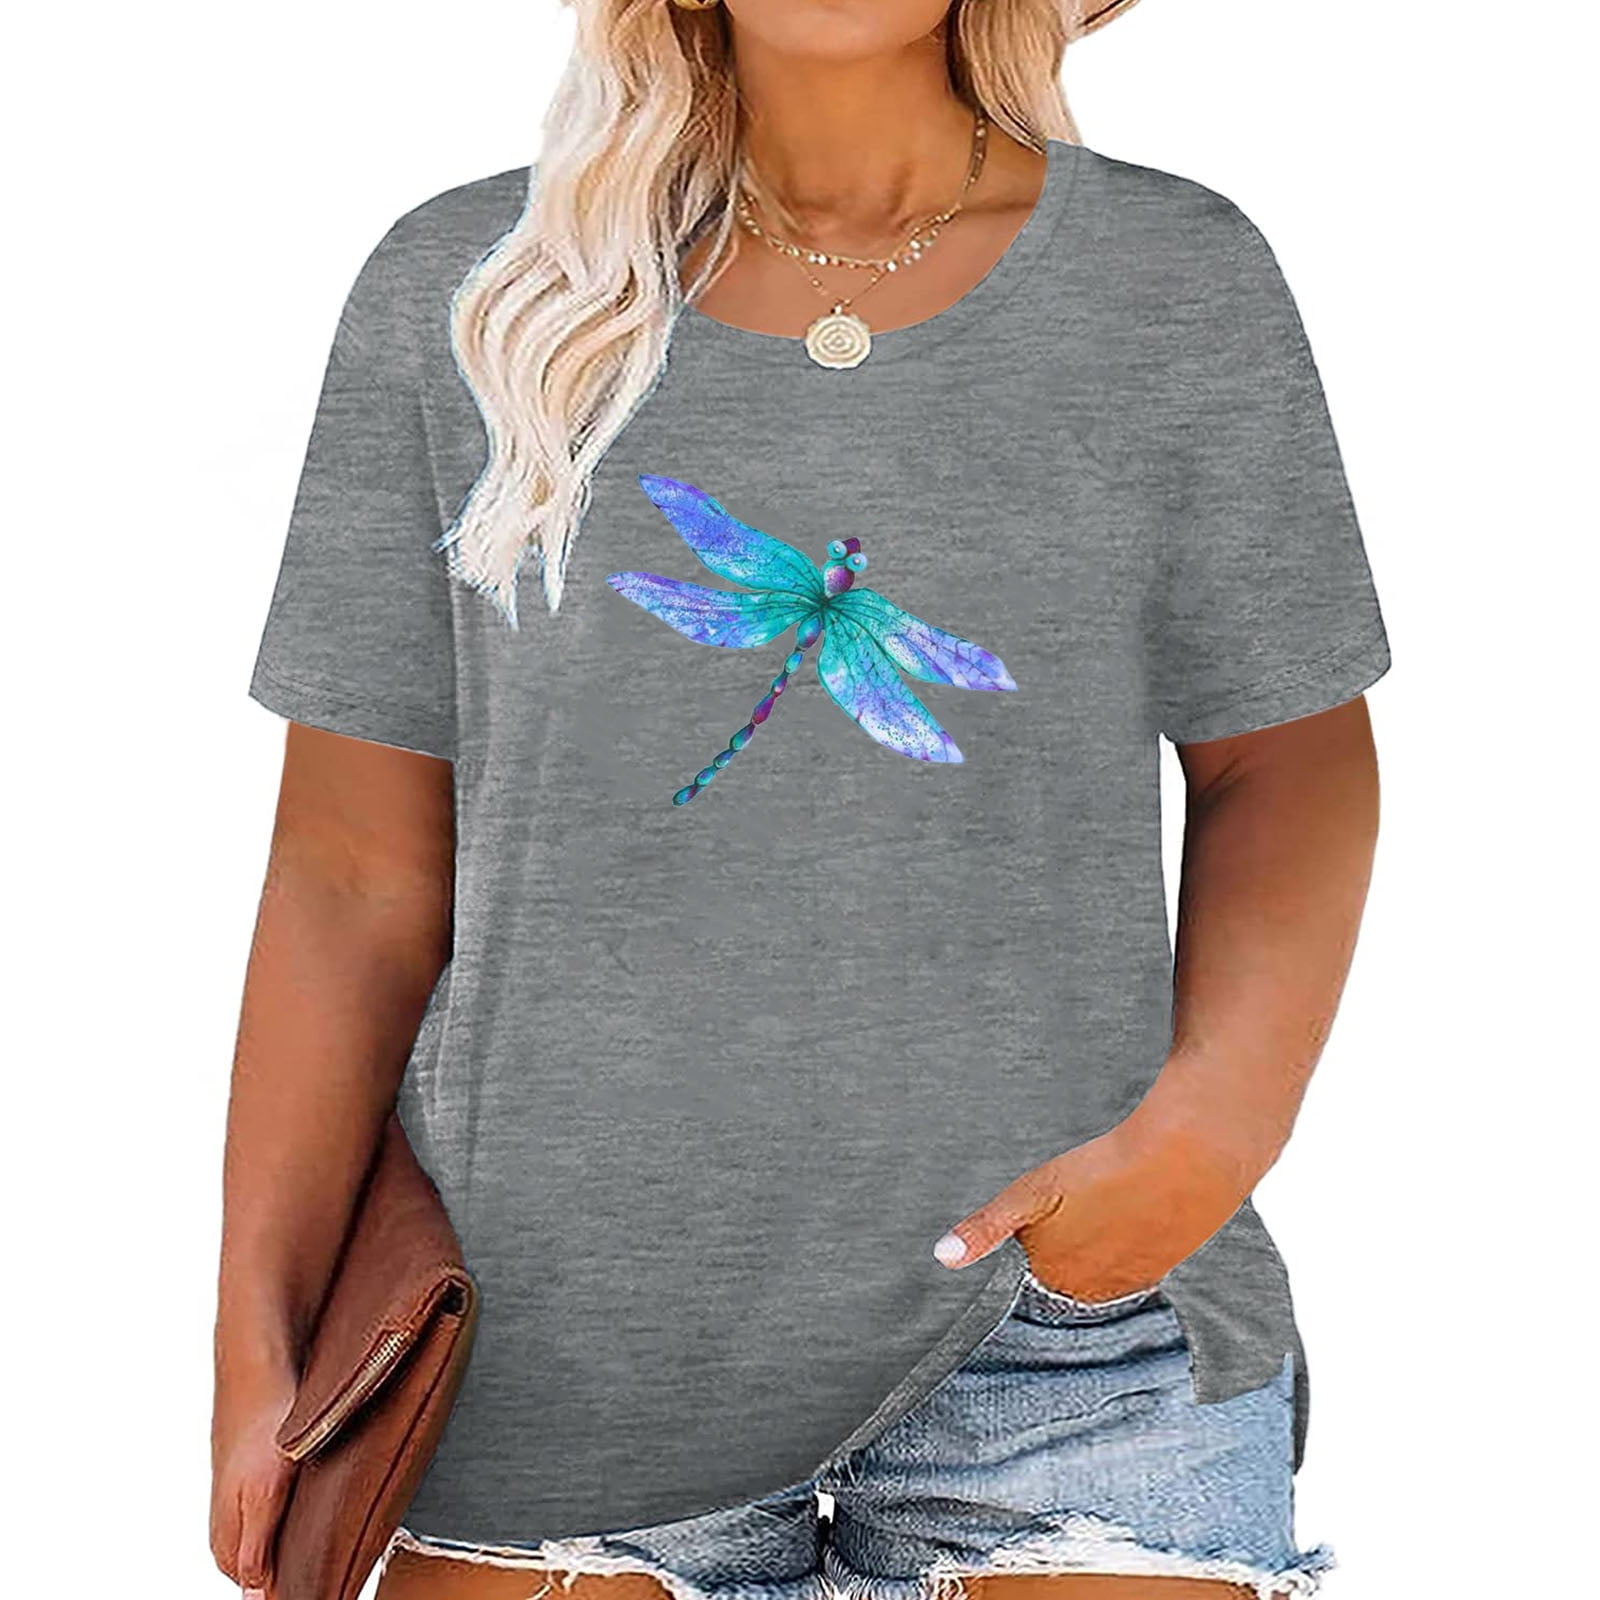 Anbech Women's Dragonfly Tee Shirts Plus Size Graphic Tshirts Flower ...